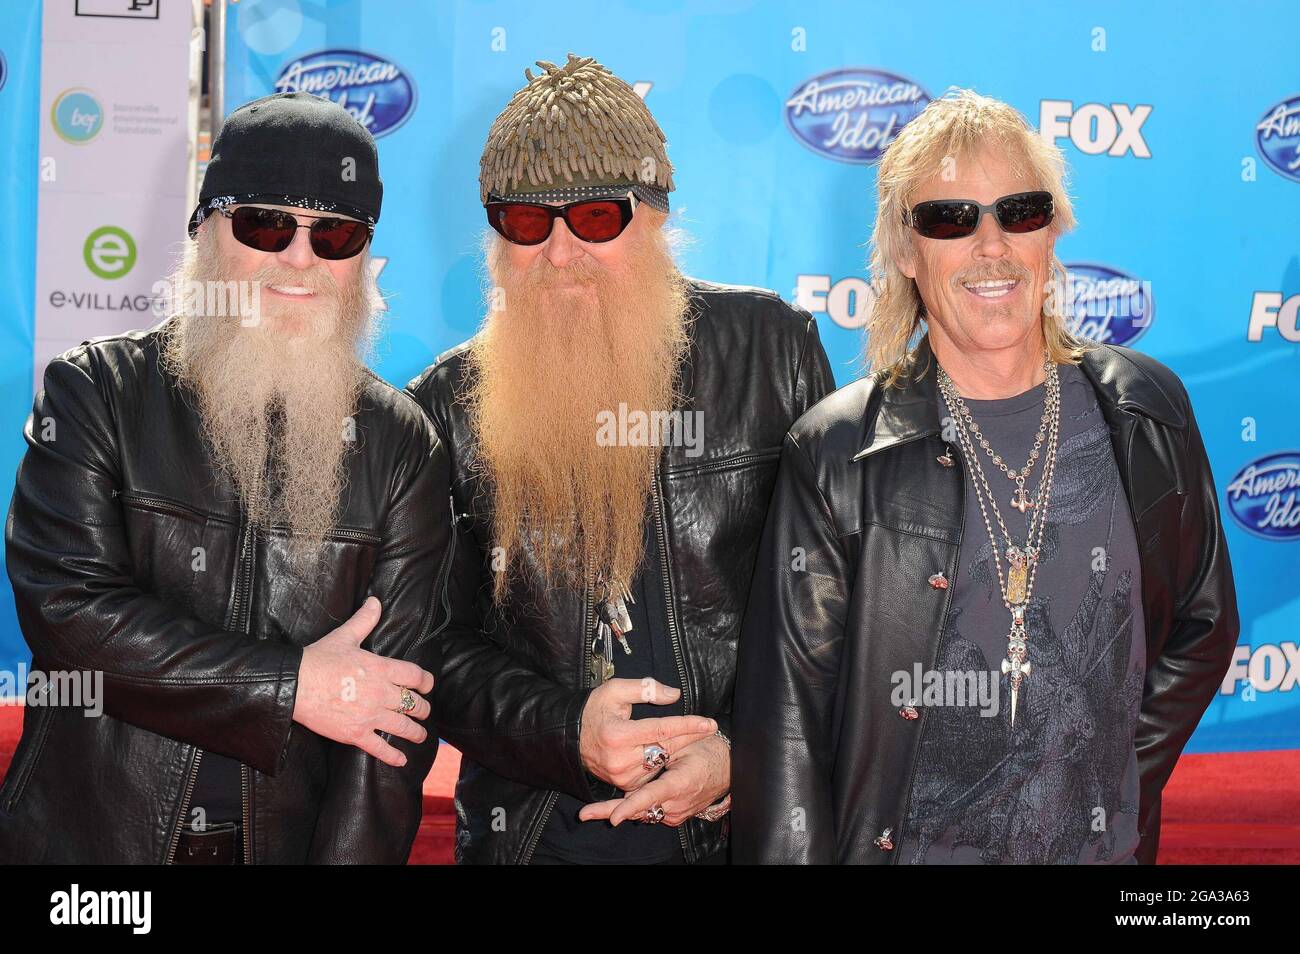 Los Angeles, USA. 21st May, 2008. Dusty Hill, John Cusimano and Billy F. Gibbons of ZZ Top. 21 May 2008 - Los Angeles, California. American Idol 2008 Grand Finale - Arrivals at the Nokia Theatre. Photo Credit: Giulio Marcocchi/Sipa Press. /Idol gm.064/0805220941 Credit: Sipa USA/Alamy Live News Stock Photo